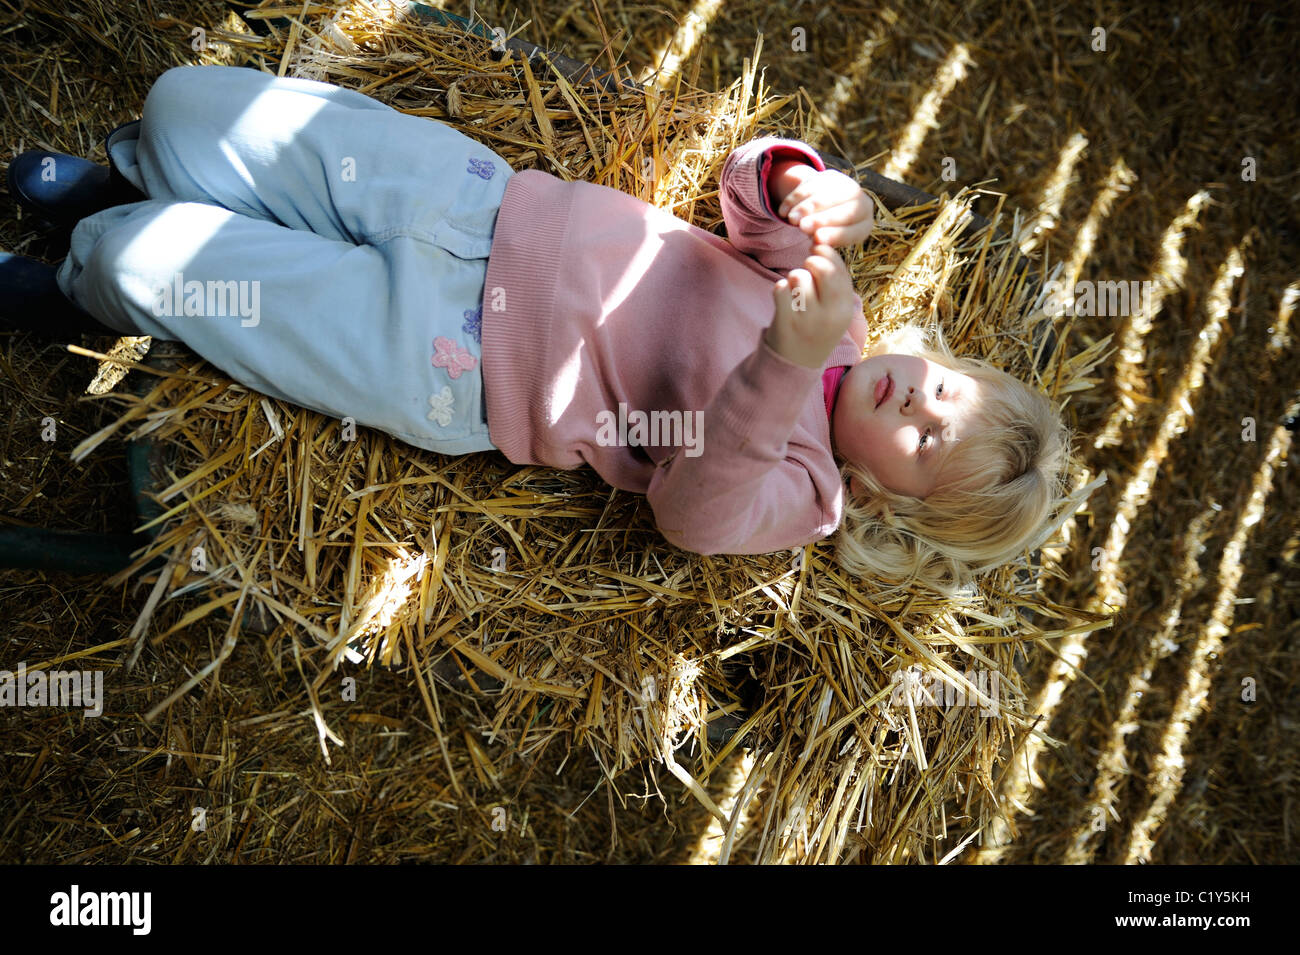 Stock photo of a five year old girl lying on a wheelbarrow filled with straw. Stock Photo